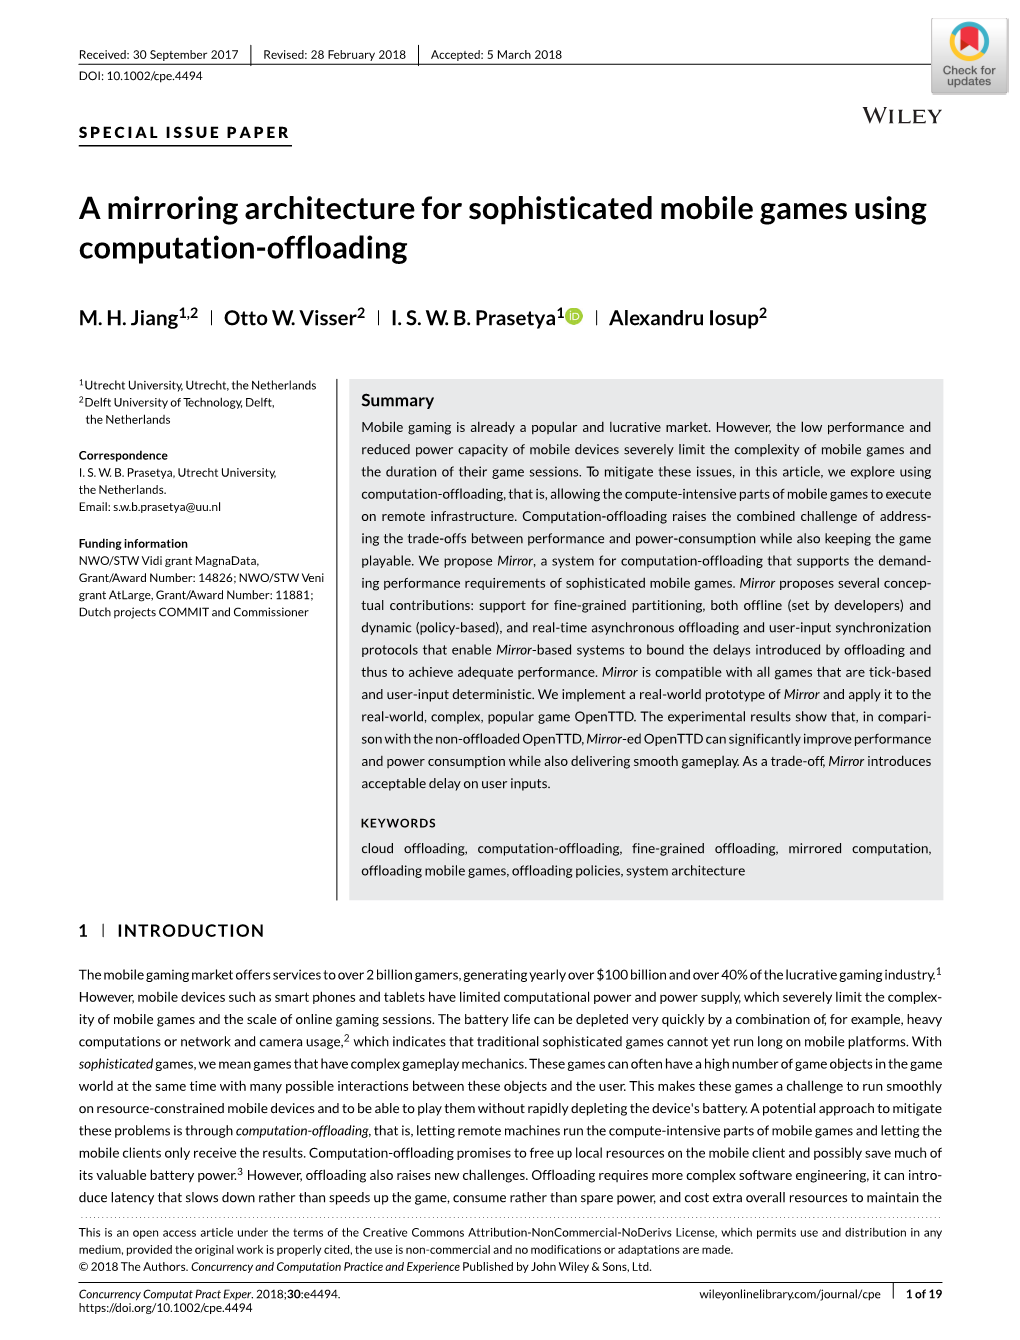 A Mirroring Architecture for Sophisticated Mobile Games Using Computation-Offloading